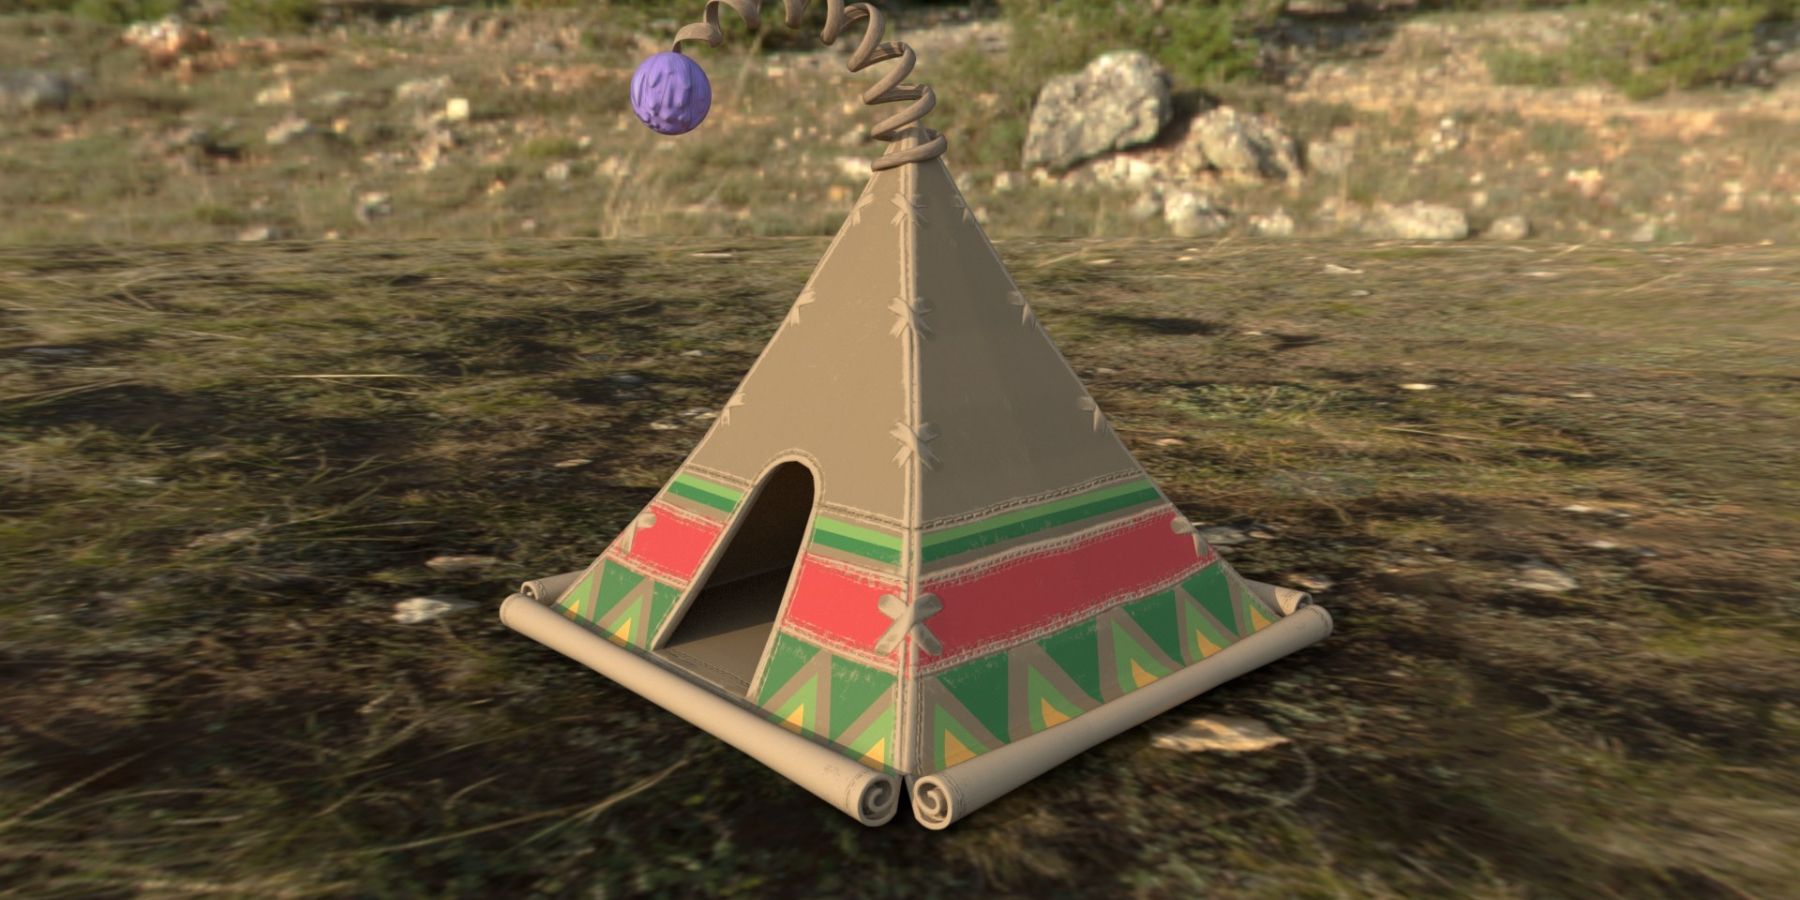 The Tent Item in Final Fantasy